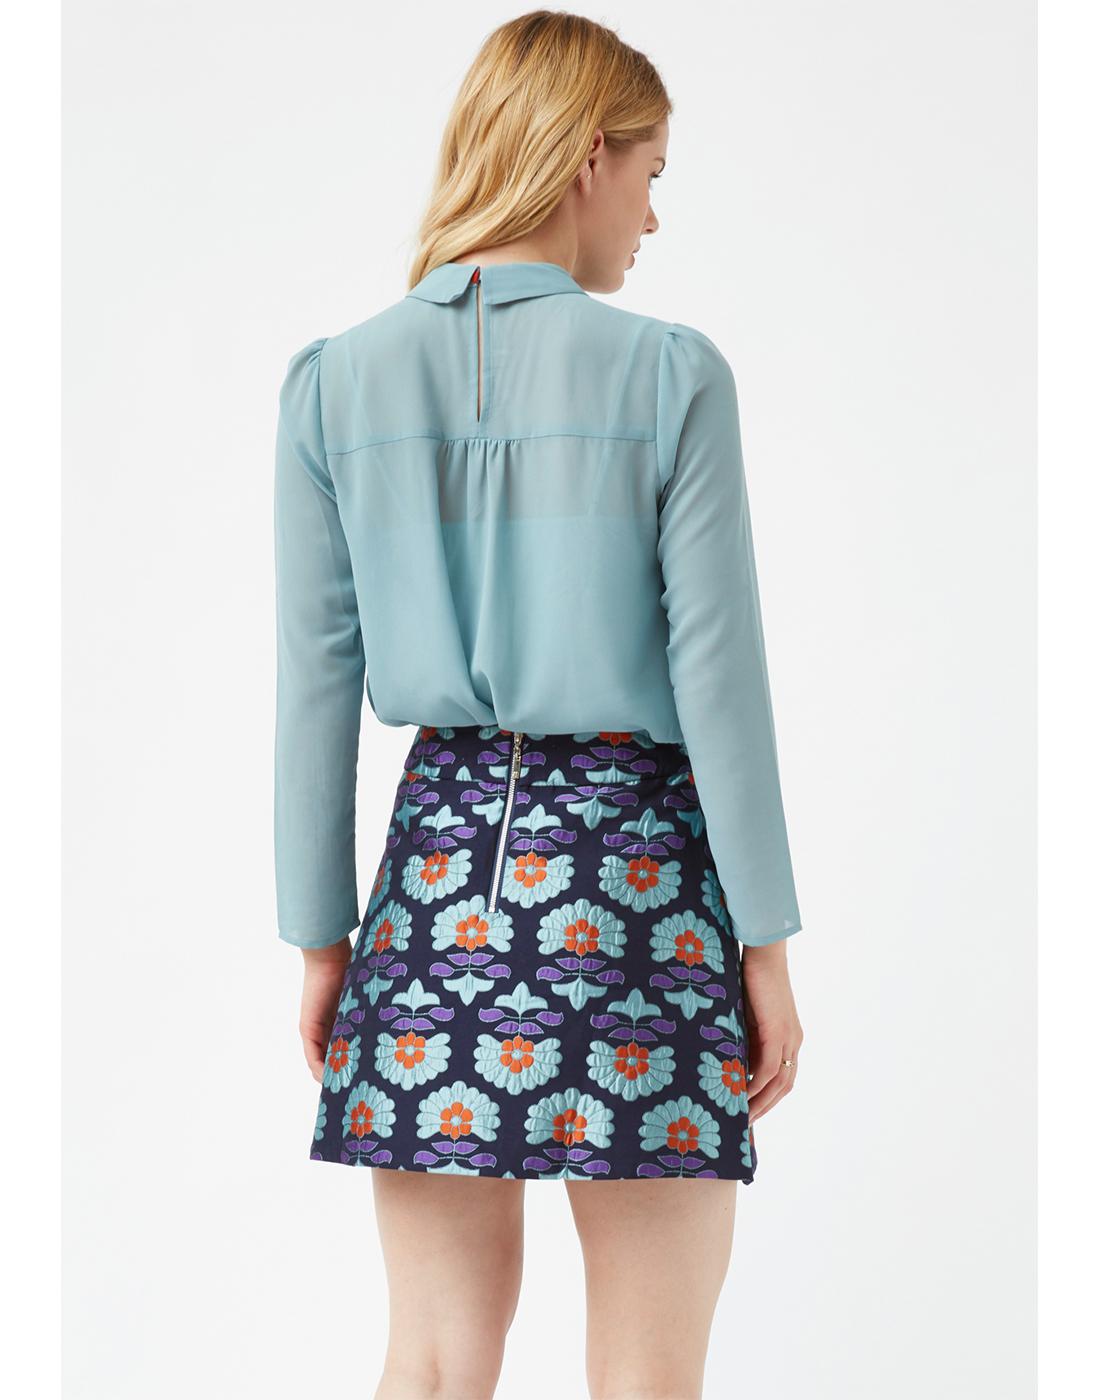 TRAFFIC PEOPLE Flowers of Fortune Mod 60s Mini Skirt in Blue